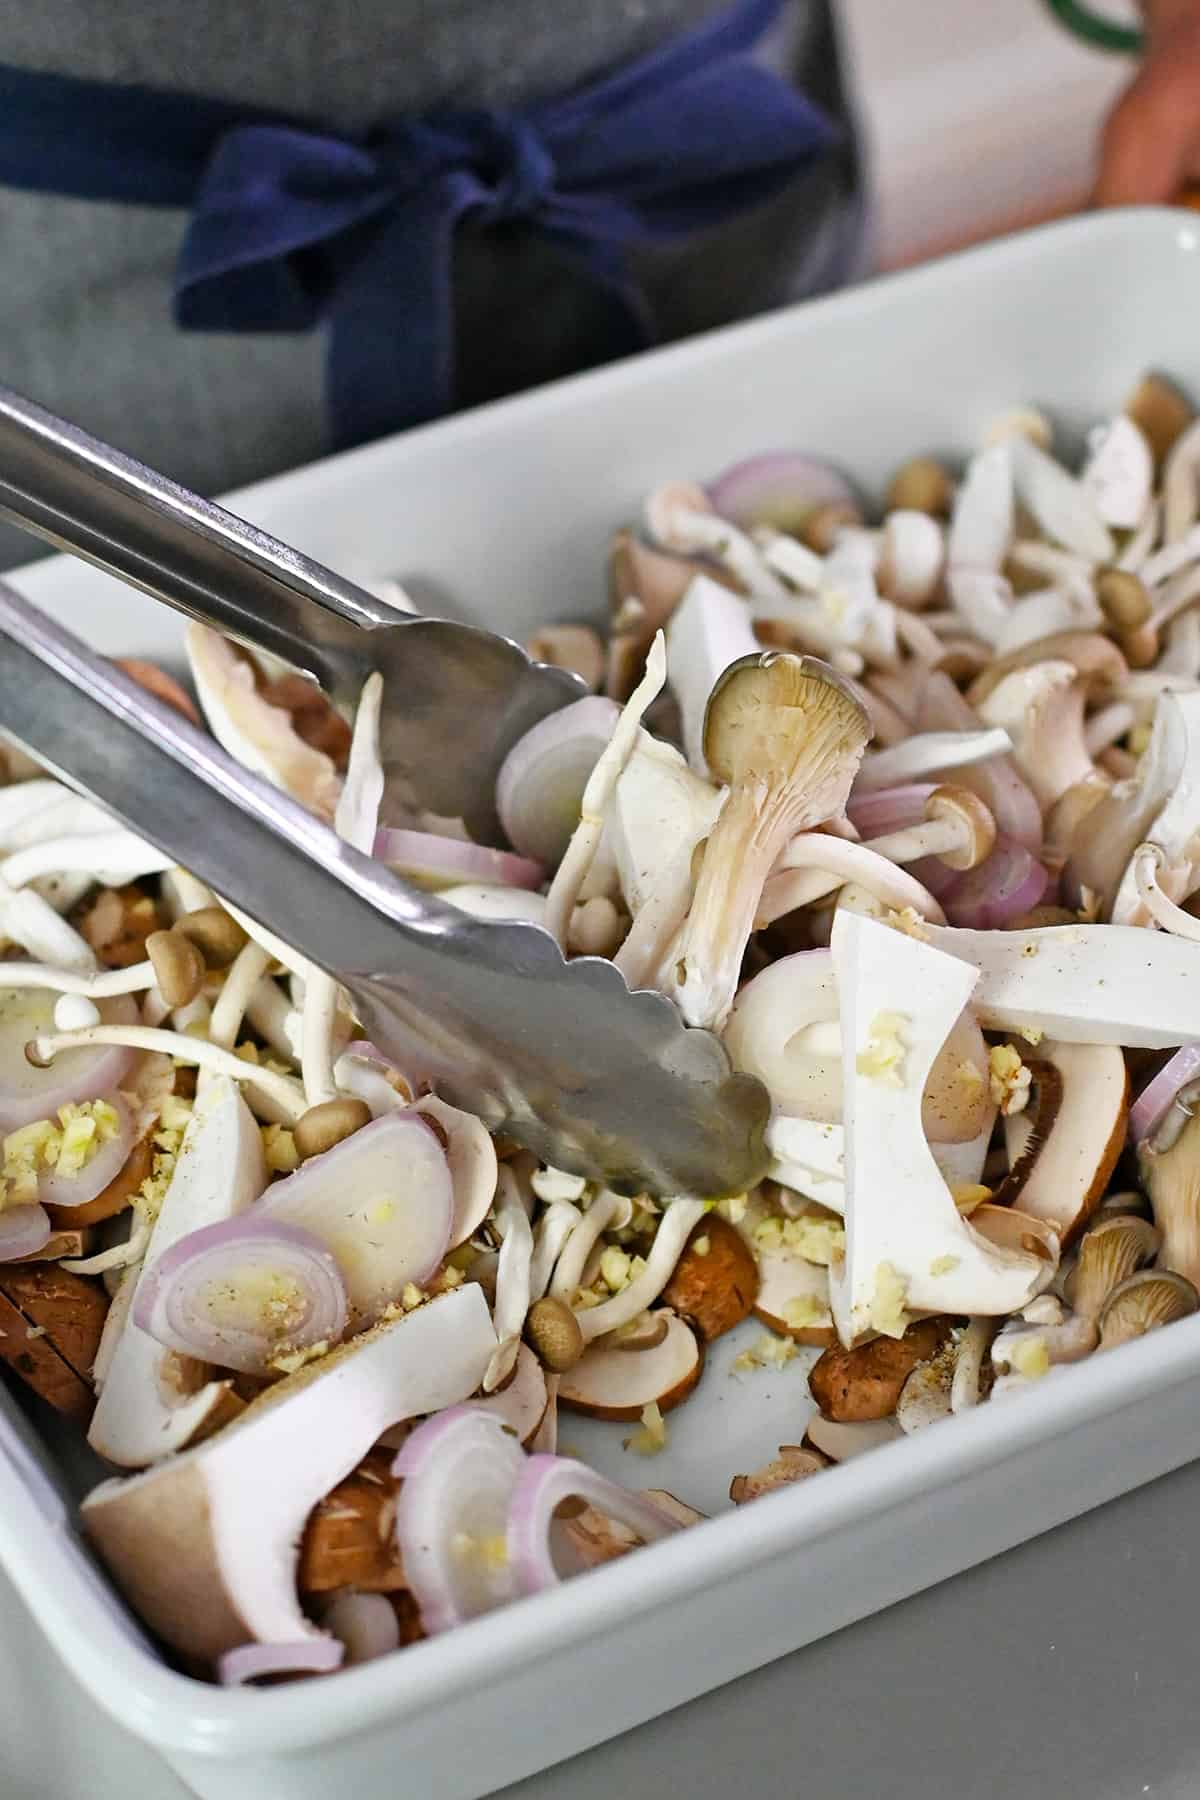 Tossing raw mushrooms, sliced shallots, minced garlic, and seasoning in a white casserole dish with a pair of tongs.